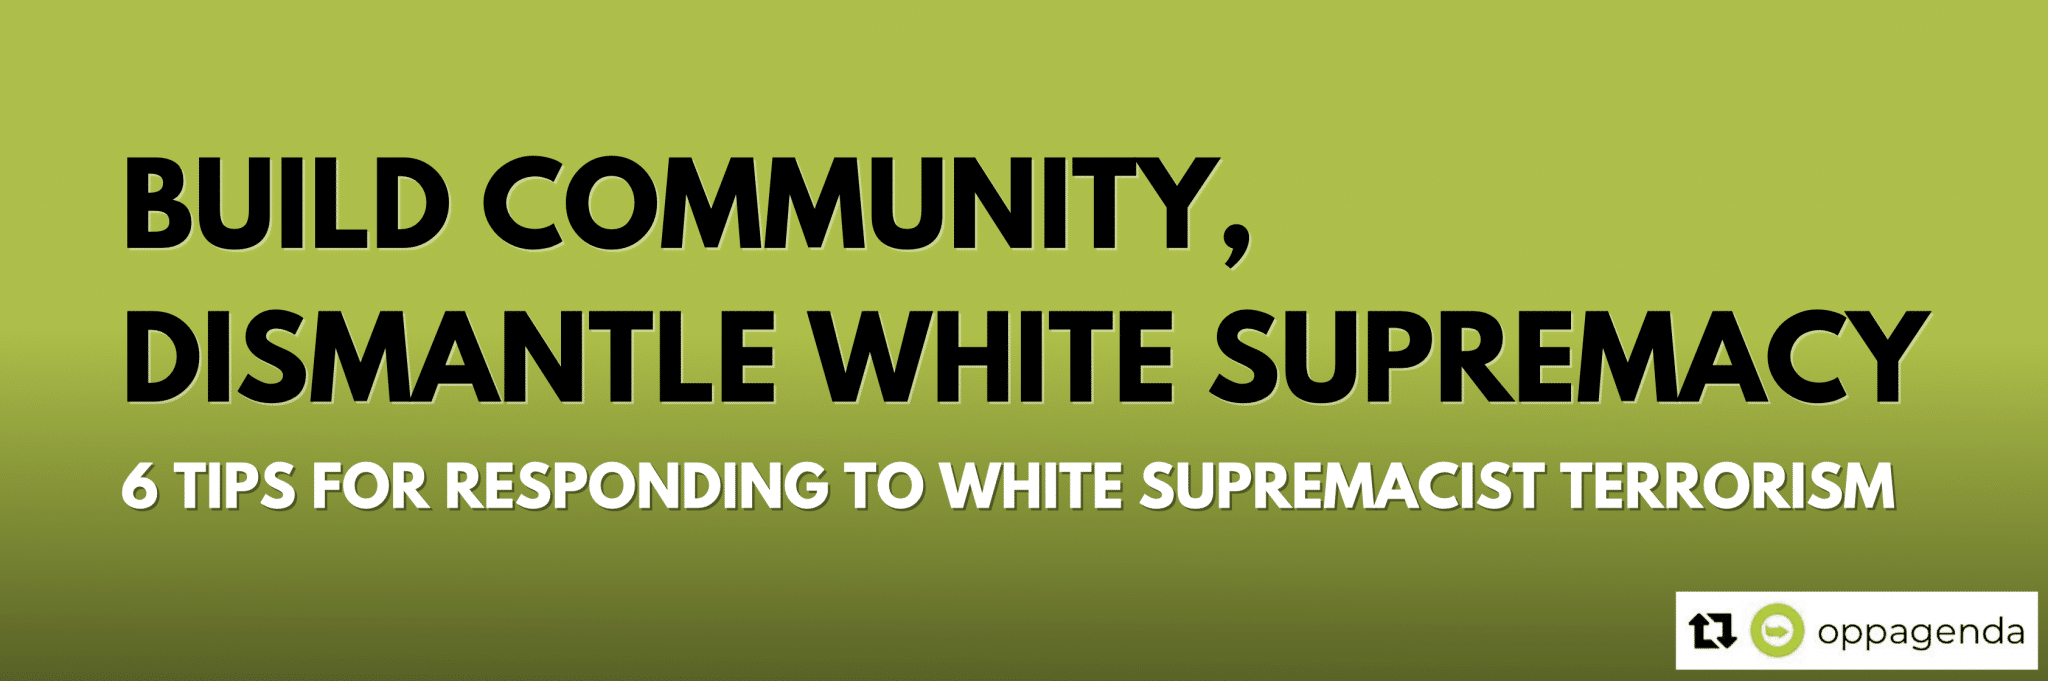 a lime green background. black bold text: build community, dismantle white supremacy. smaller white bold text: 6 tips for responding to white supremacy terrorism. a reshare icon for The Opportunity Agenda.